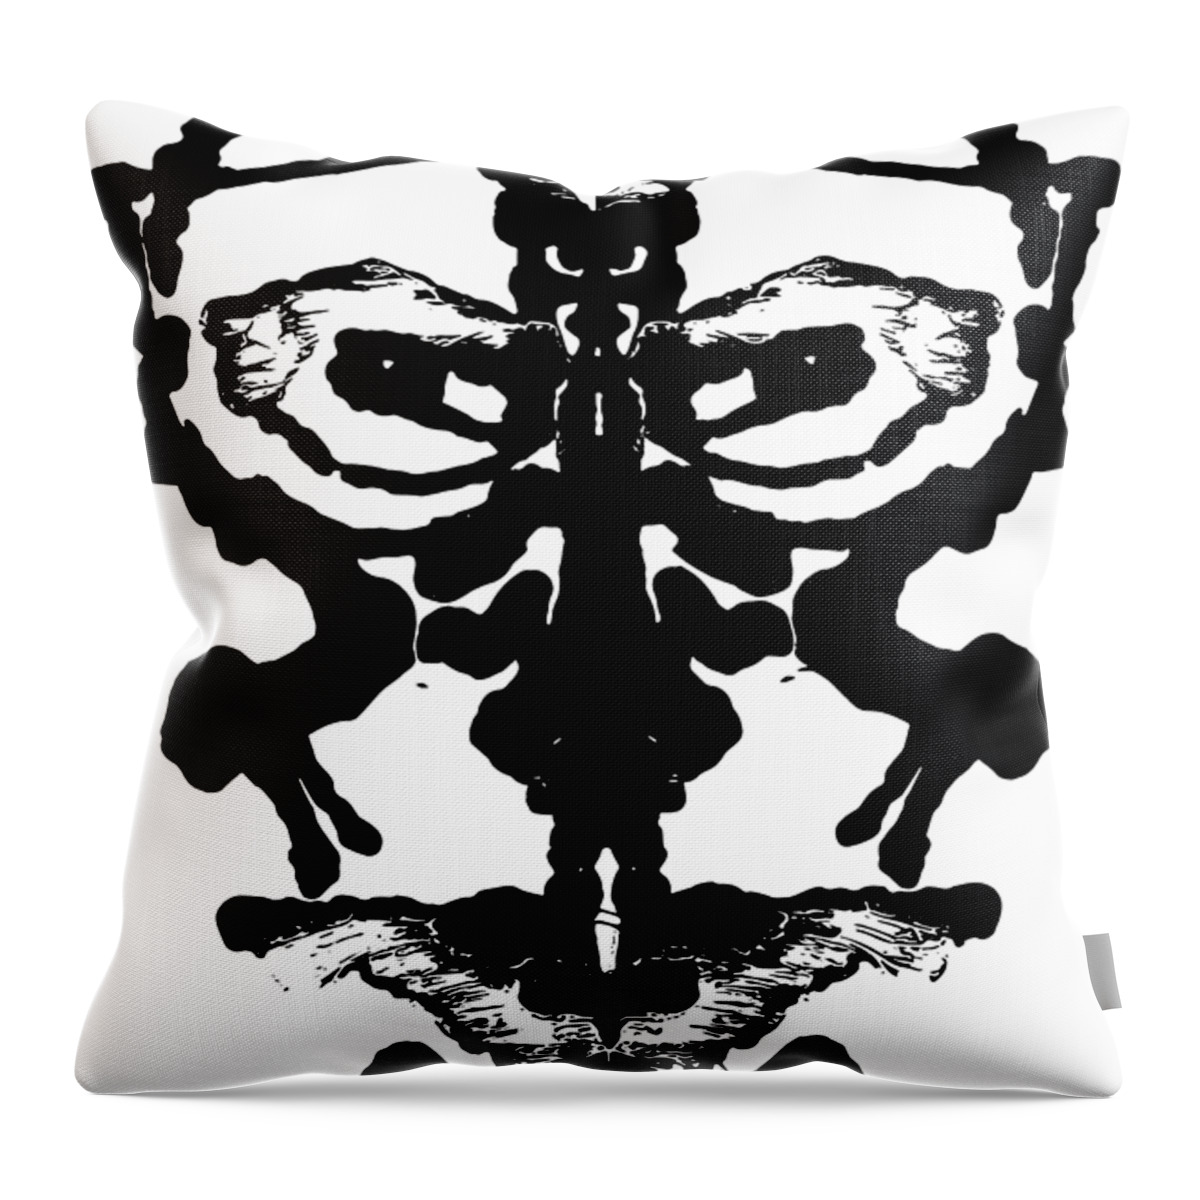 Statement Throw Pillow featuring the painting Intelligence by Stephenie Zagorski